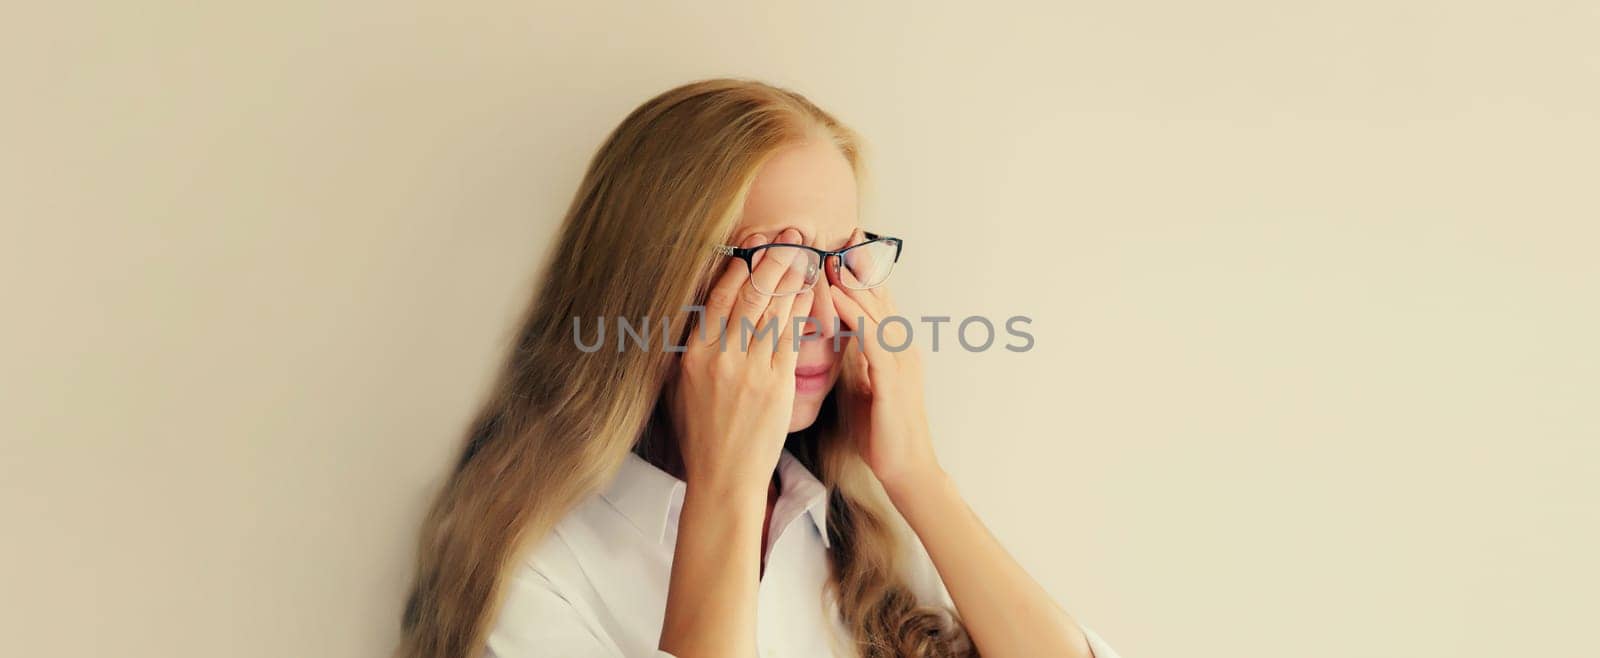 Tired overworked woman employee rubbing her eyes suffering from eye strain, dry eye syndrome or headaches after working at the computer